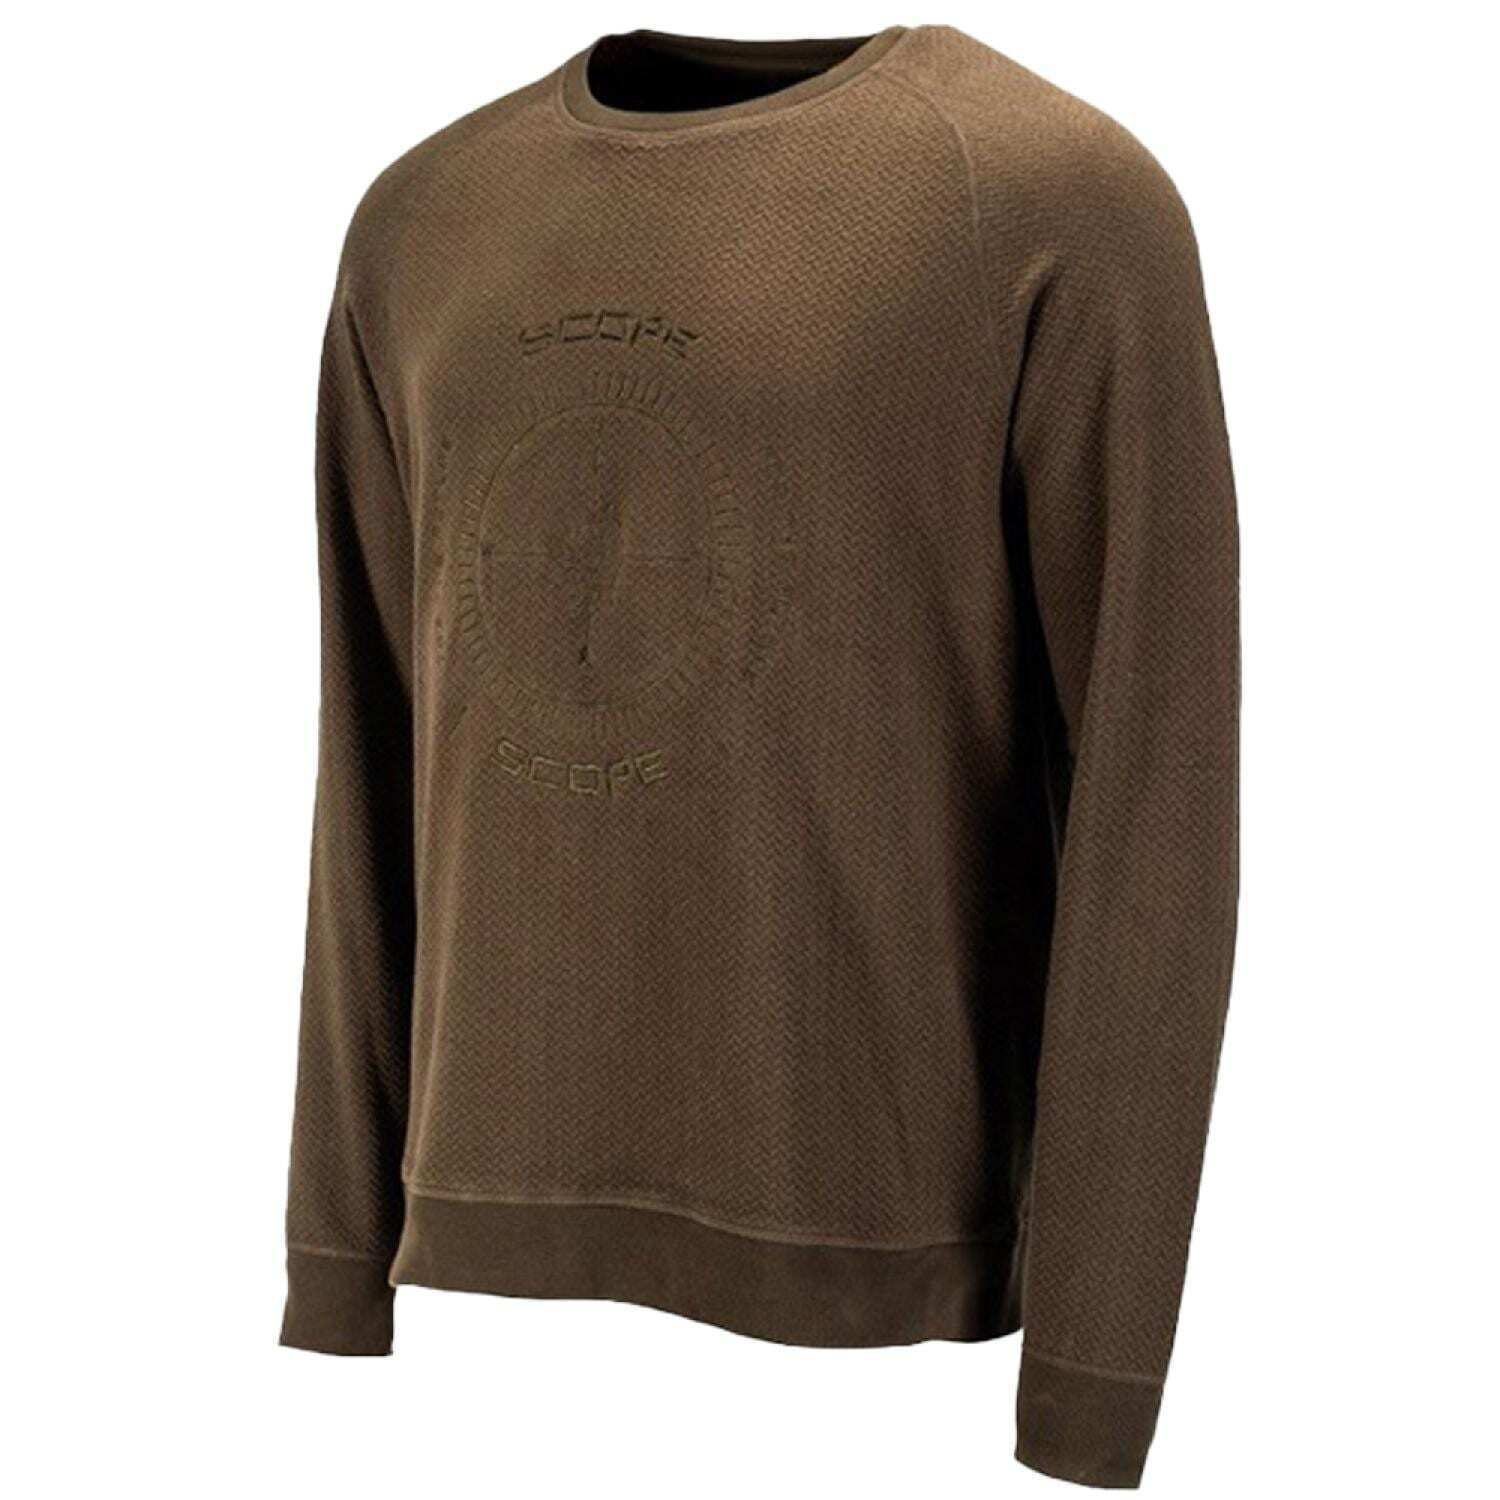 Nash Special Edition Scope Crew Neck Jumper – The Tackle Shack